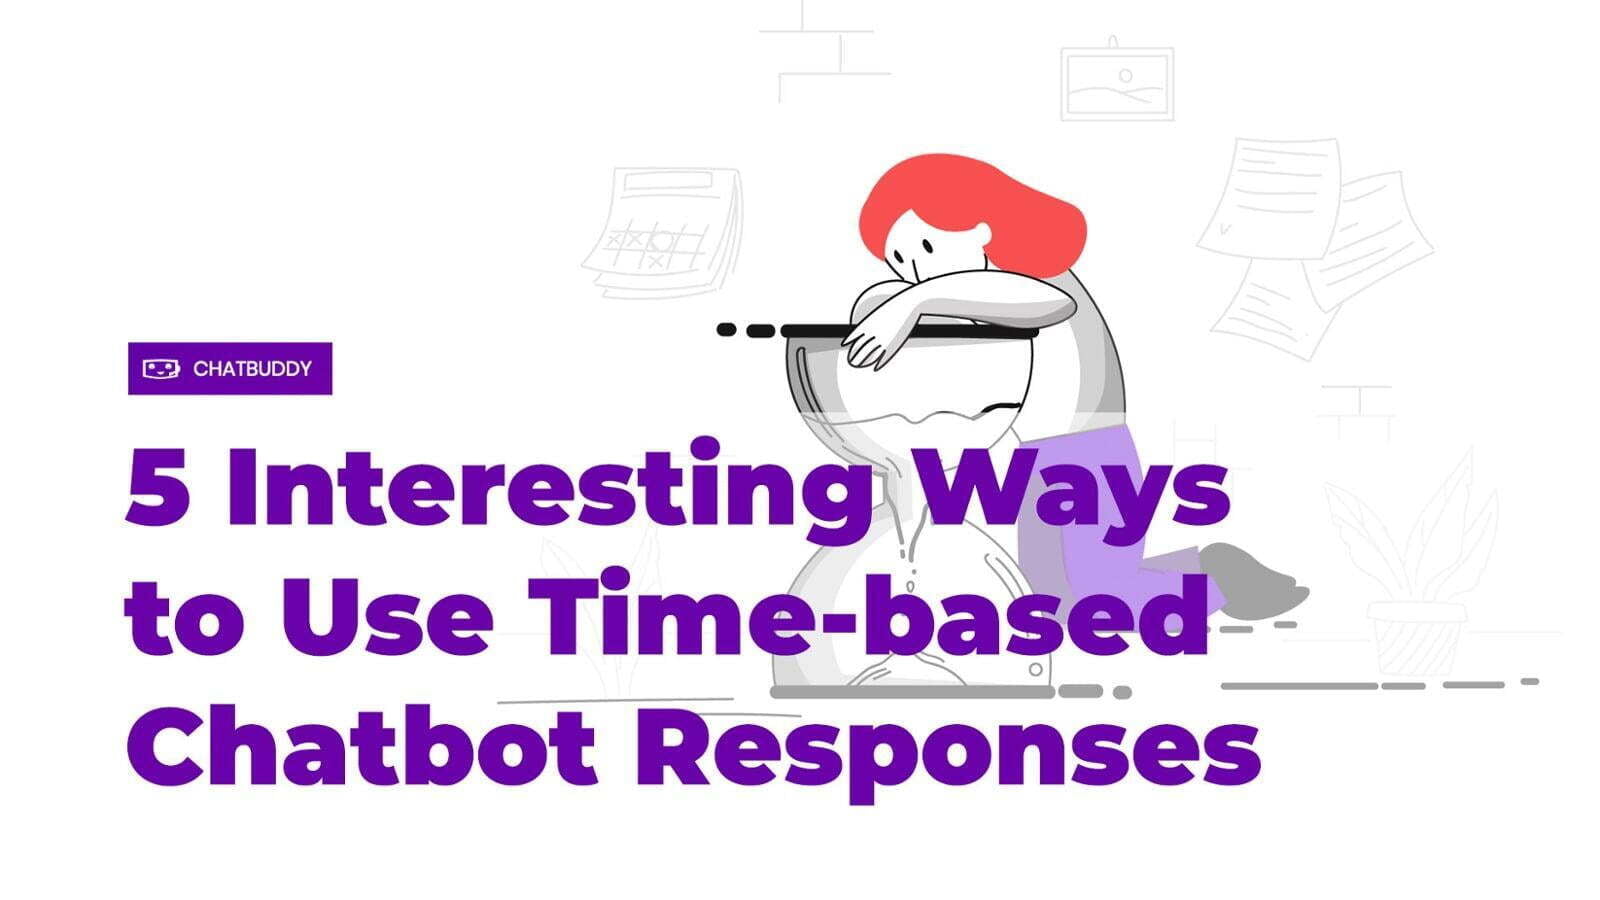 5 Interesting Ways to Use Time-based Chatbot Responses